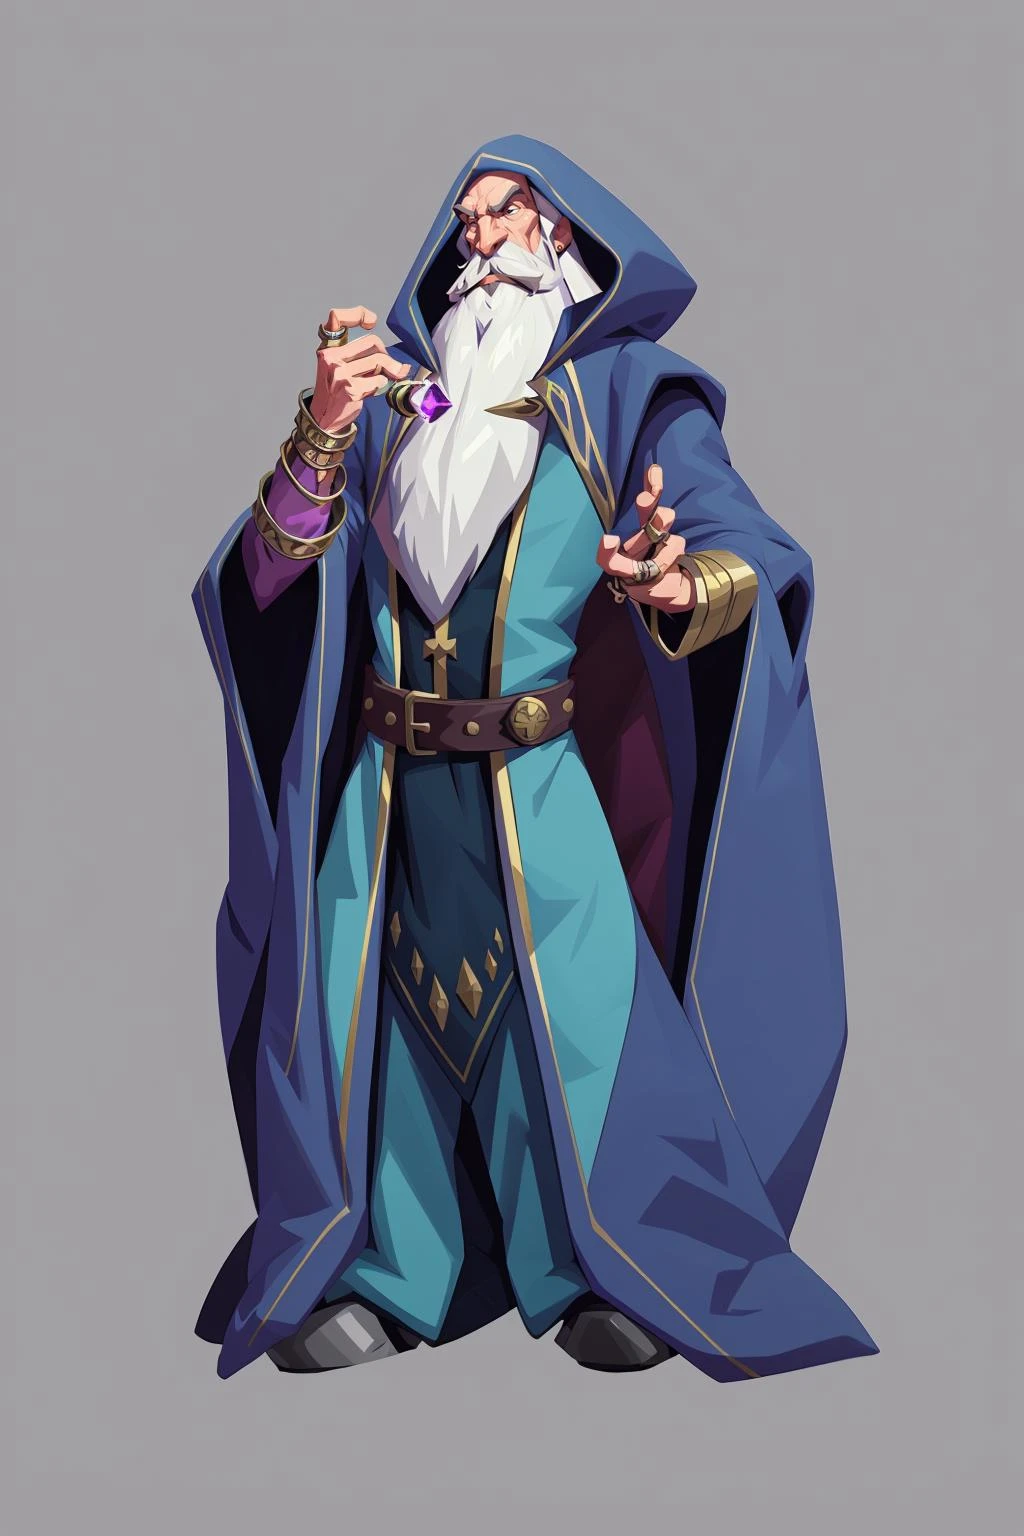 mstoconcept art, european and american cartoons, game character design, solo, 1boy, MAGICIAN, MALE FOCUS, BEARD, FACIAL HAIR, SIMPLE BACKGROUND, GRAY BACKGROUND, WIZARD, FULL BODY, STANDING, HOOD, ROBE, OLD, JEWELRY, WHITE HAIR, BRACELET, WIDE SLEEVES, OLD MAN, BELT, GEMSTONE, LONG SLEEVES,